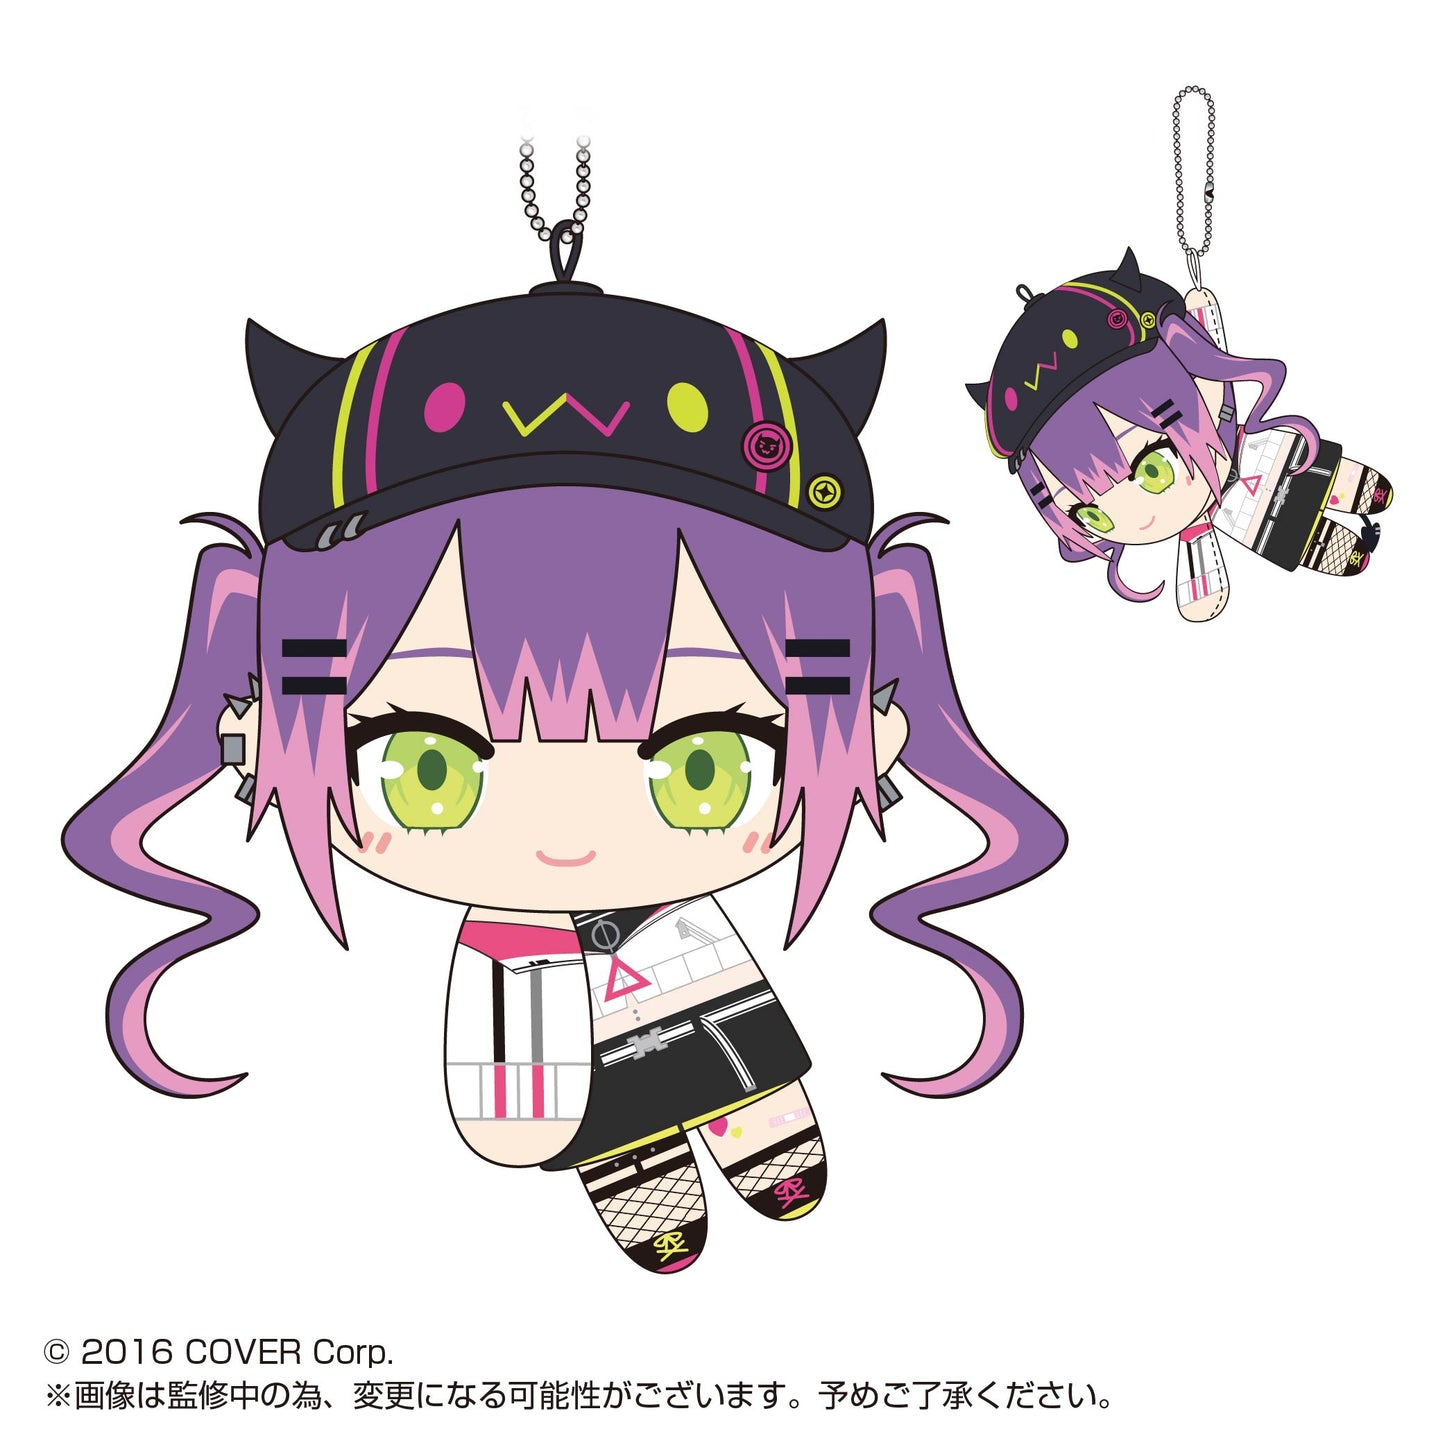 (Pre-Order) Hololive Production - TeteColle 3 - Small Plushy